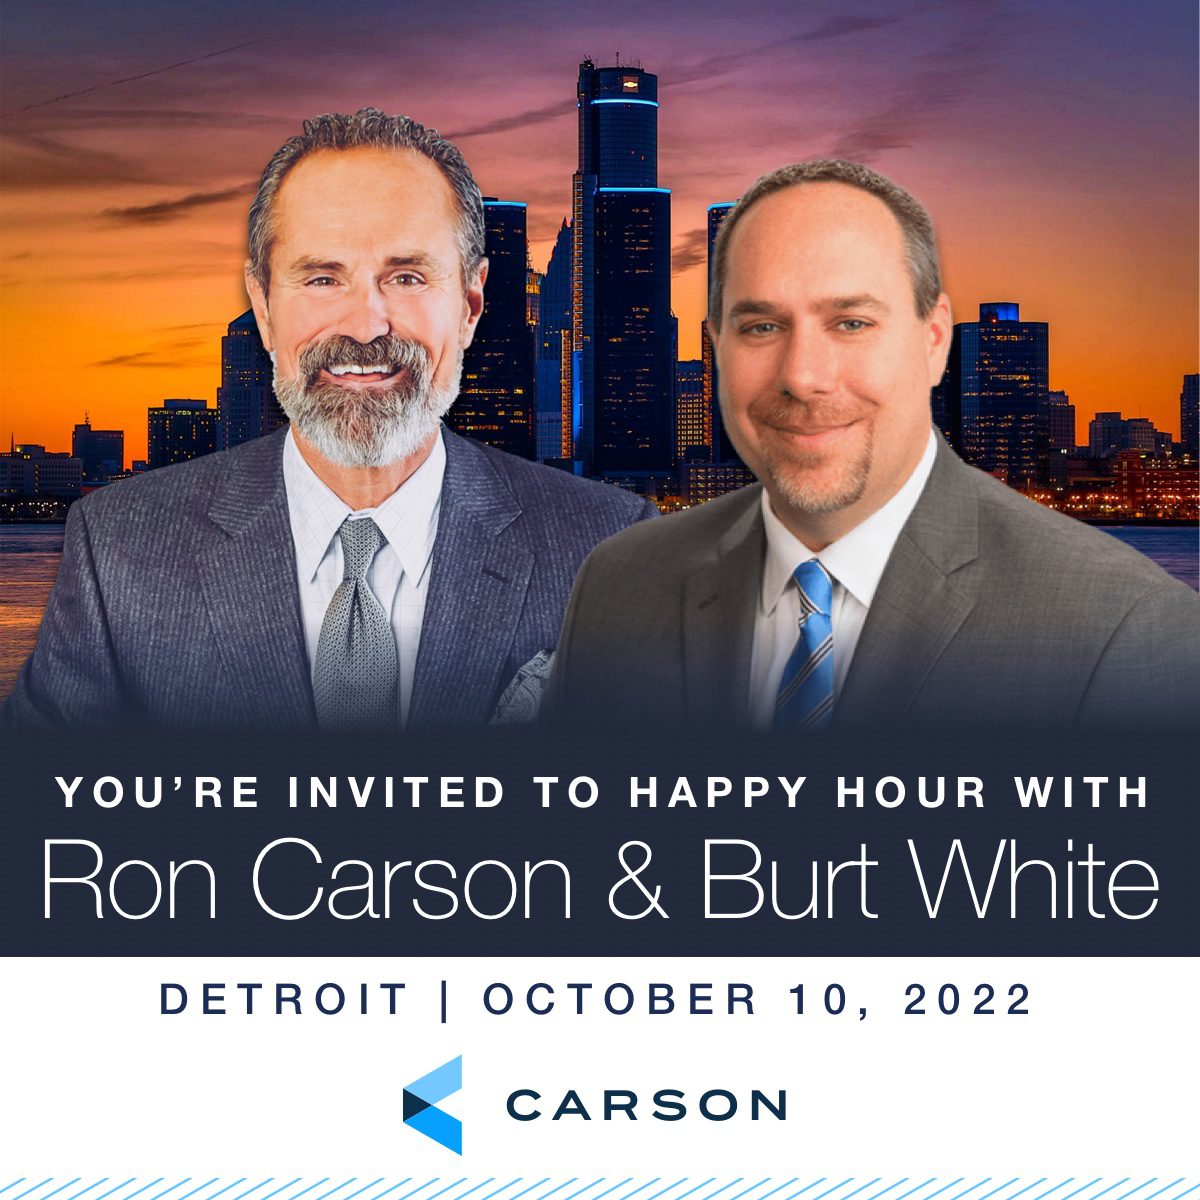 Join Ron Carson and Burt White for Happy Hour in Detroit